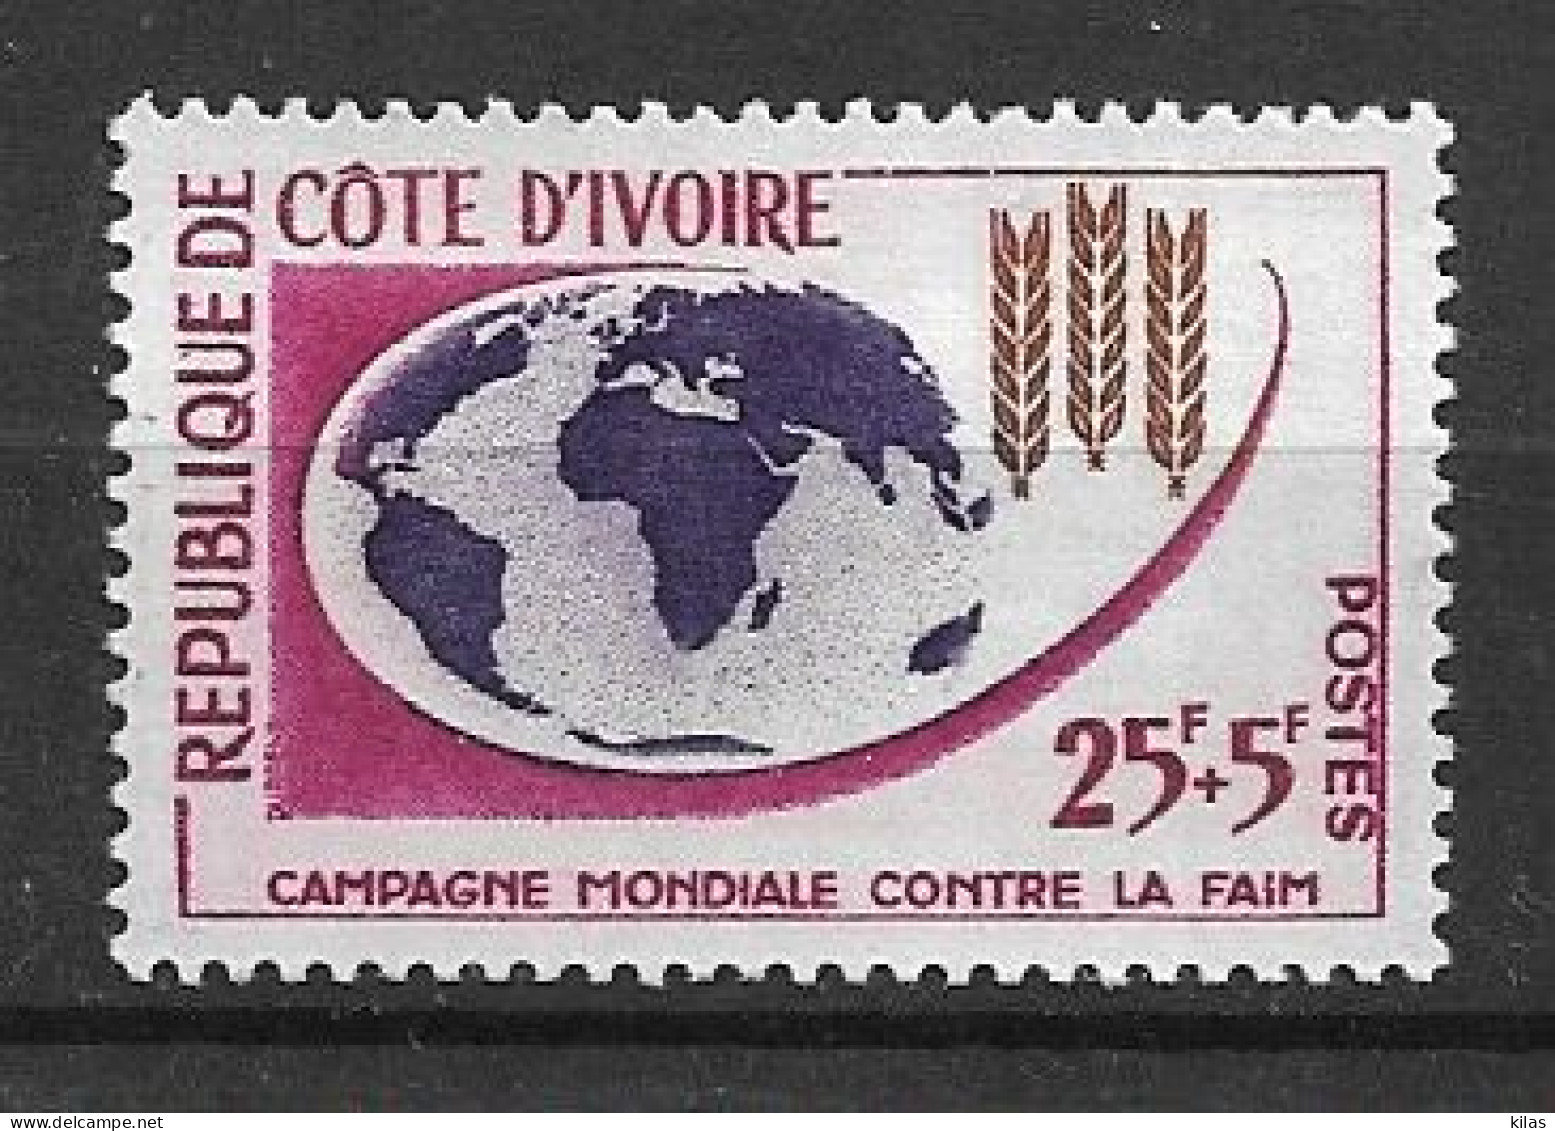 COTE D'IVOIRE 1963 FREEDOM FROM HUNGER MNH - Alimentation